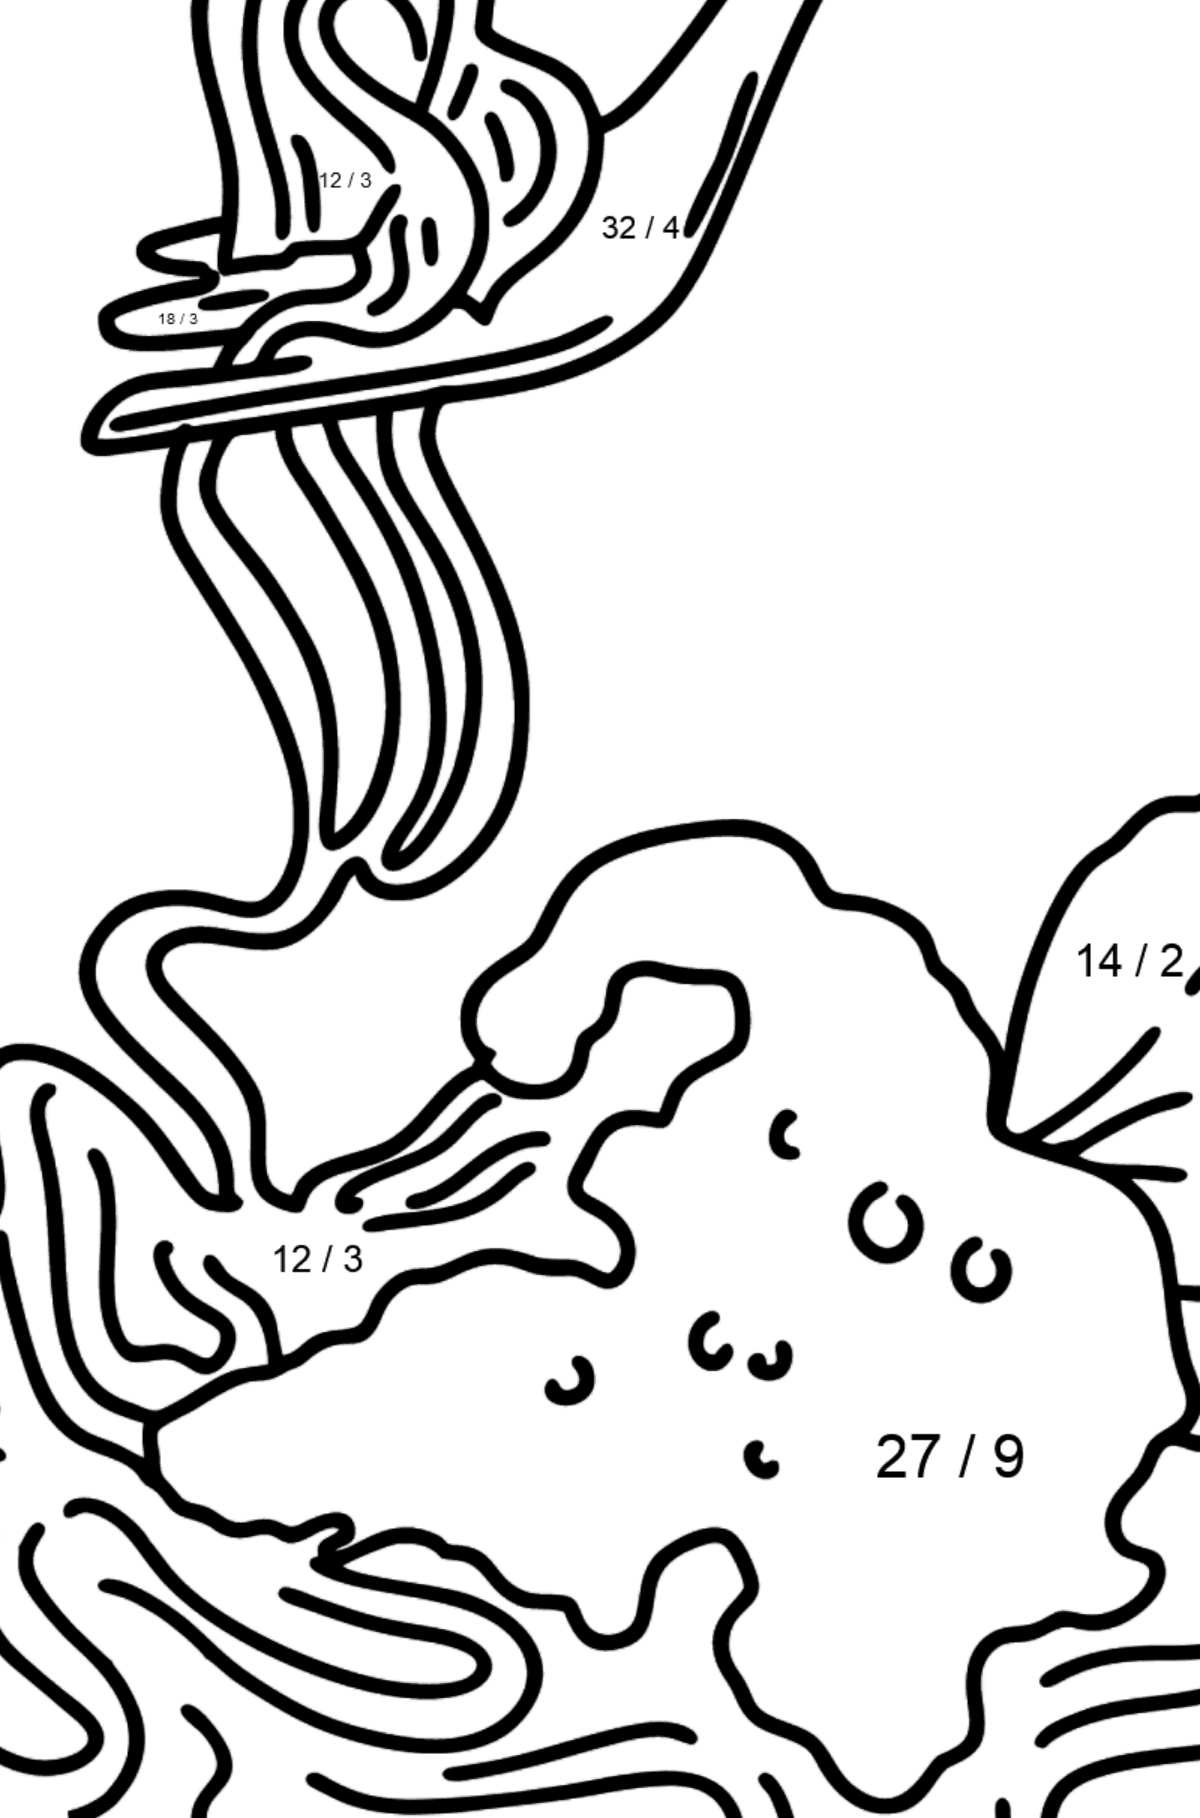 Spaghetti with Tomato Sauce coloring page - Math Coloring - Division for Kids